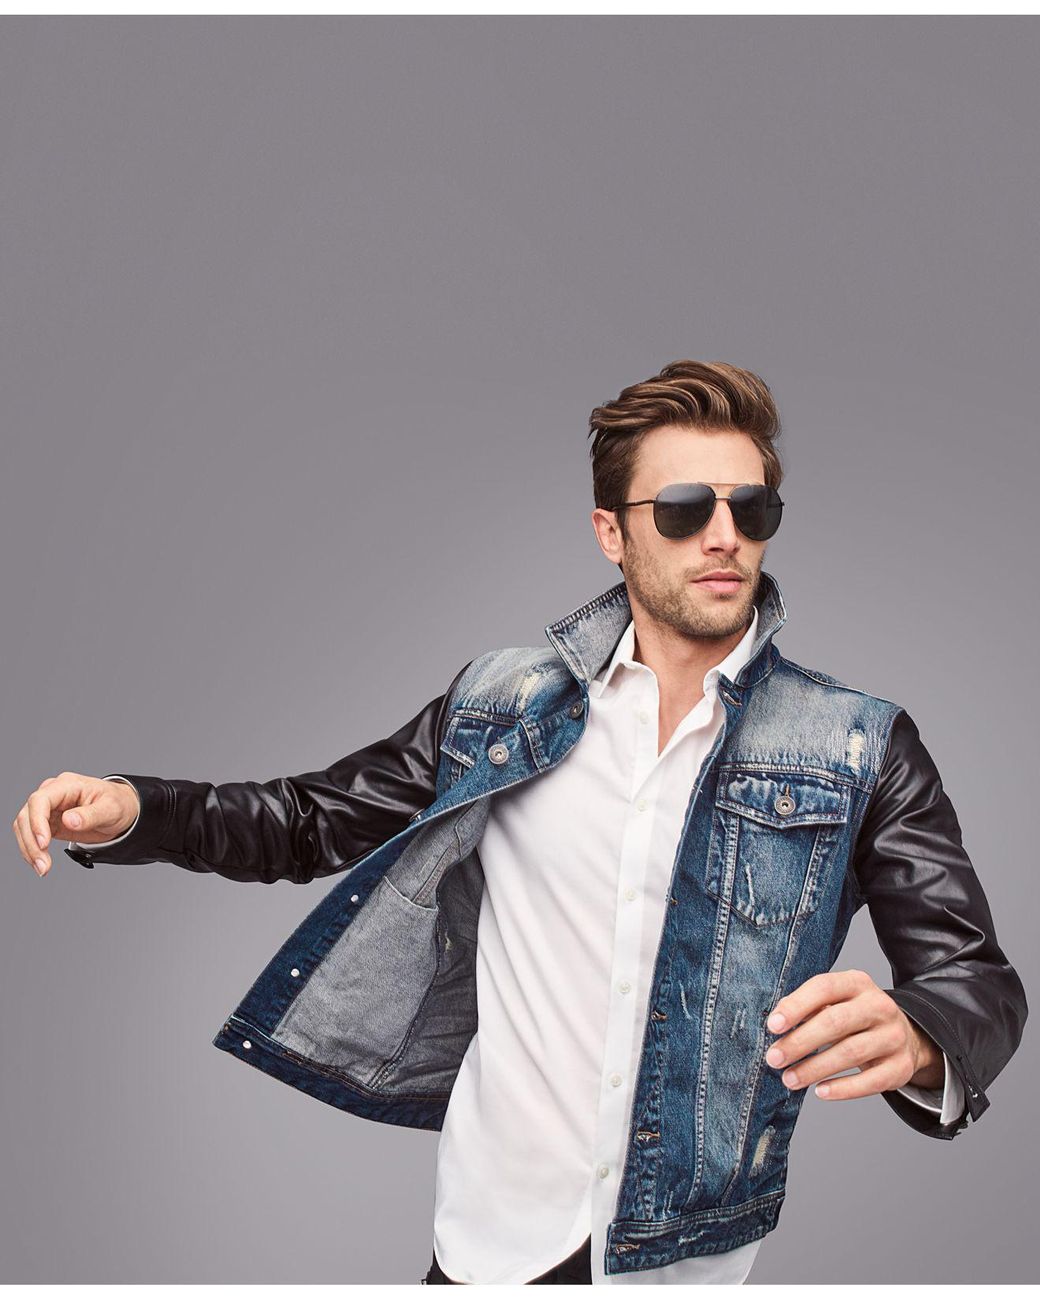 How To Wear A Leather Jacket For Men  50 Fashion Styles